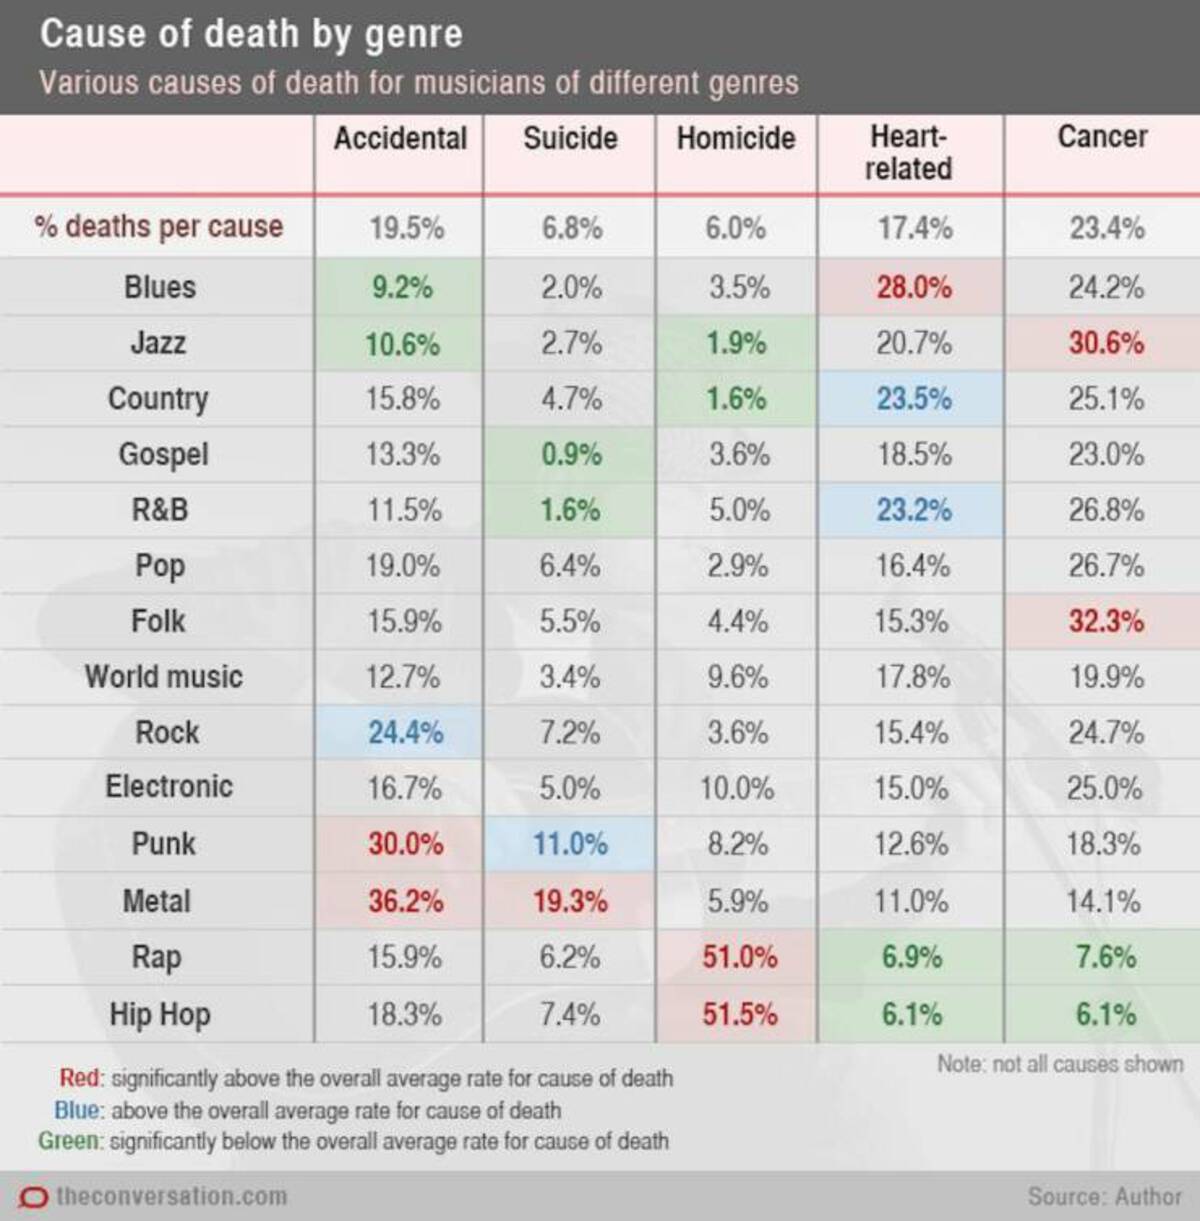 cause of death by music genre - Cause of death by genre Various causes of death for musicians of different genres Accidental Suicide Homicide Heart Cancer related % deaths per cause 19.5% 6.8% 6.0% 17.4% 23.4% Blues 9.2% 2.0% 3.5% 28.0% 24.2% Jazz 10.6% 2